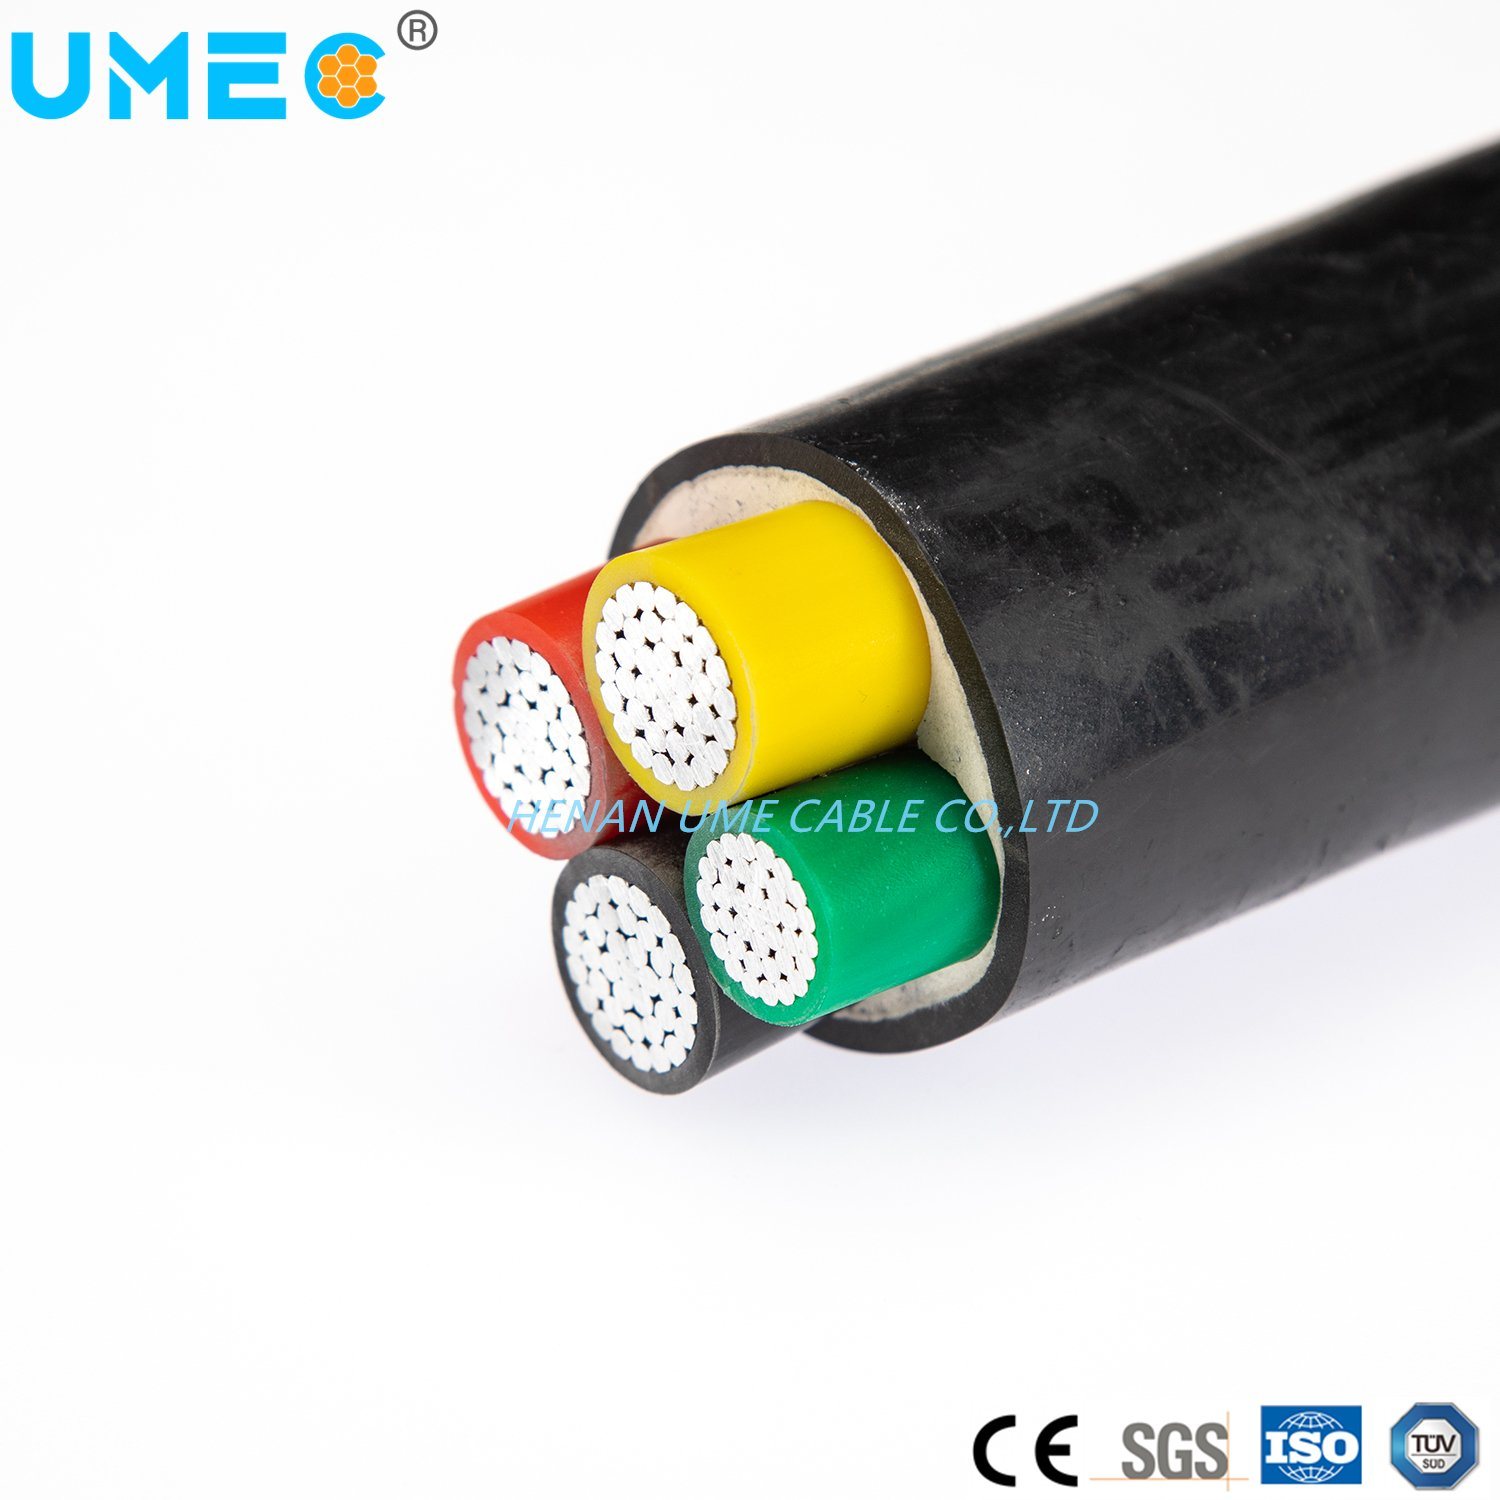 Underground Direct Buried Cu (Al) Conductor PVC/XLPE Insulated PVC Sheathed Cable VV Vlv Yjv Yjlv